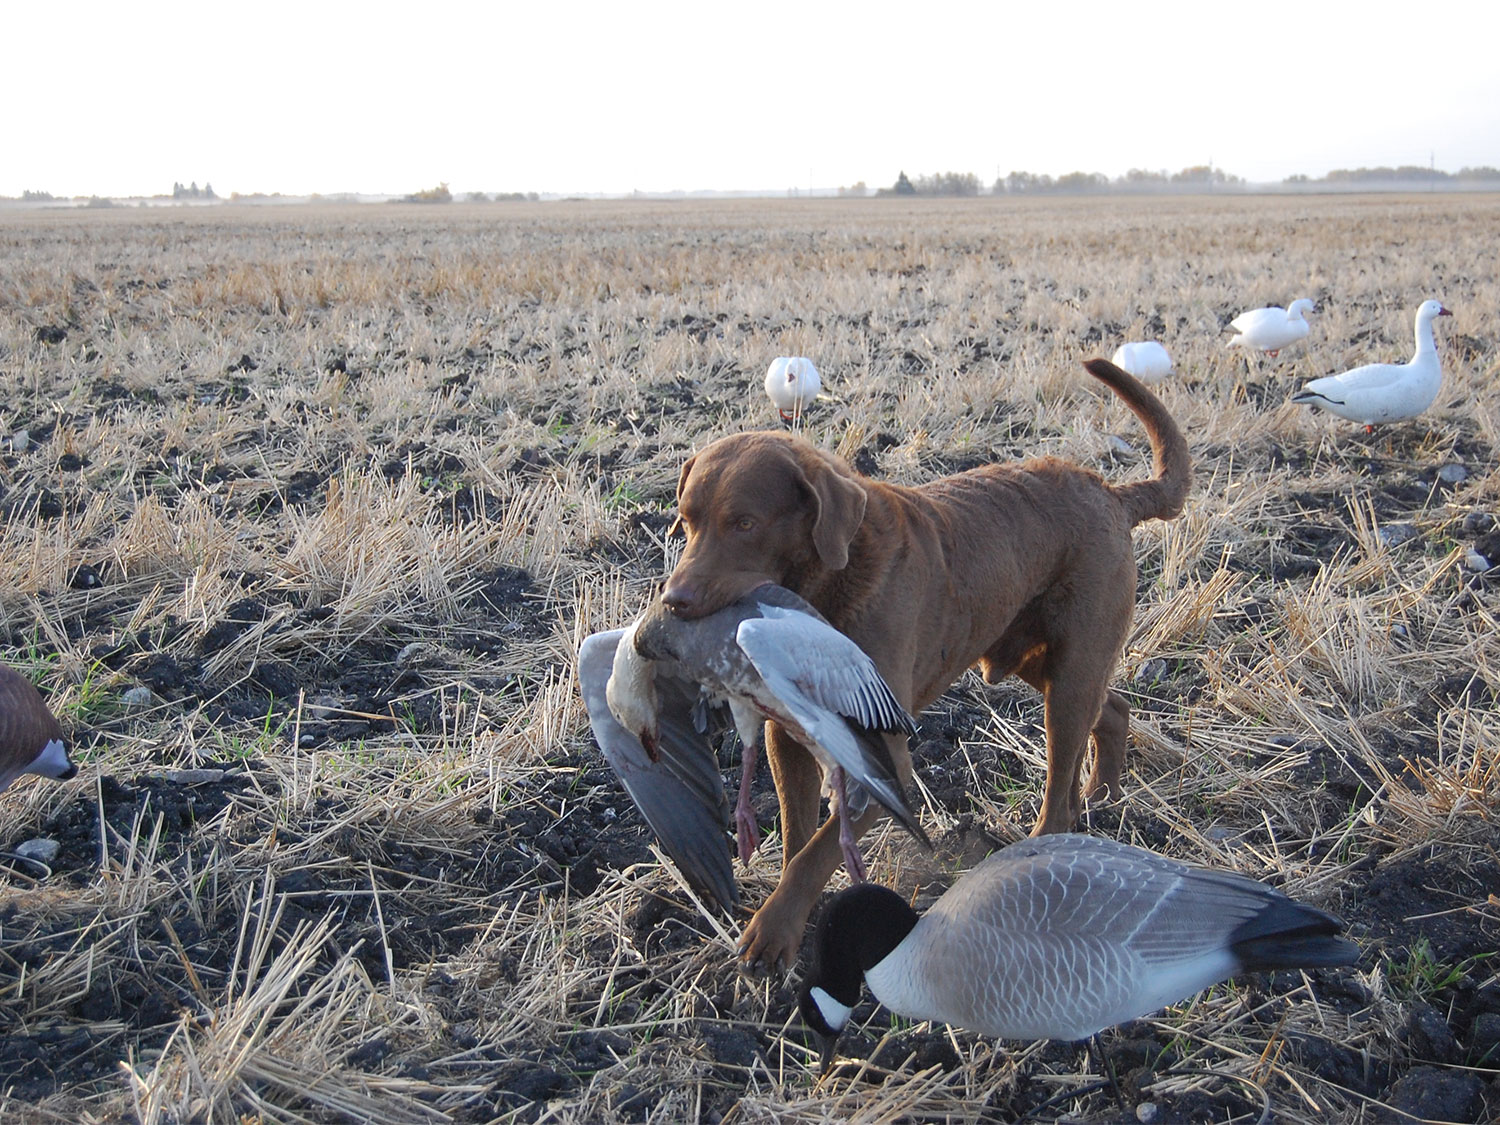 A hunting do retrieving ducks from a field.